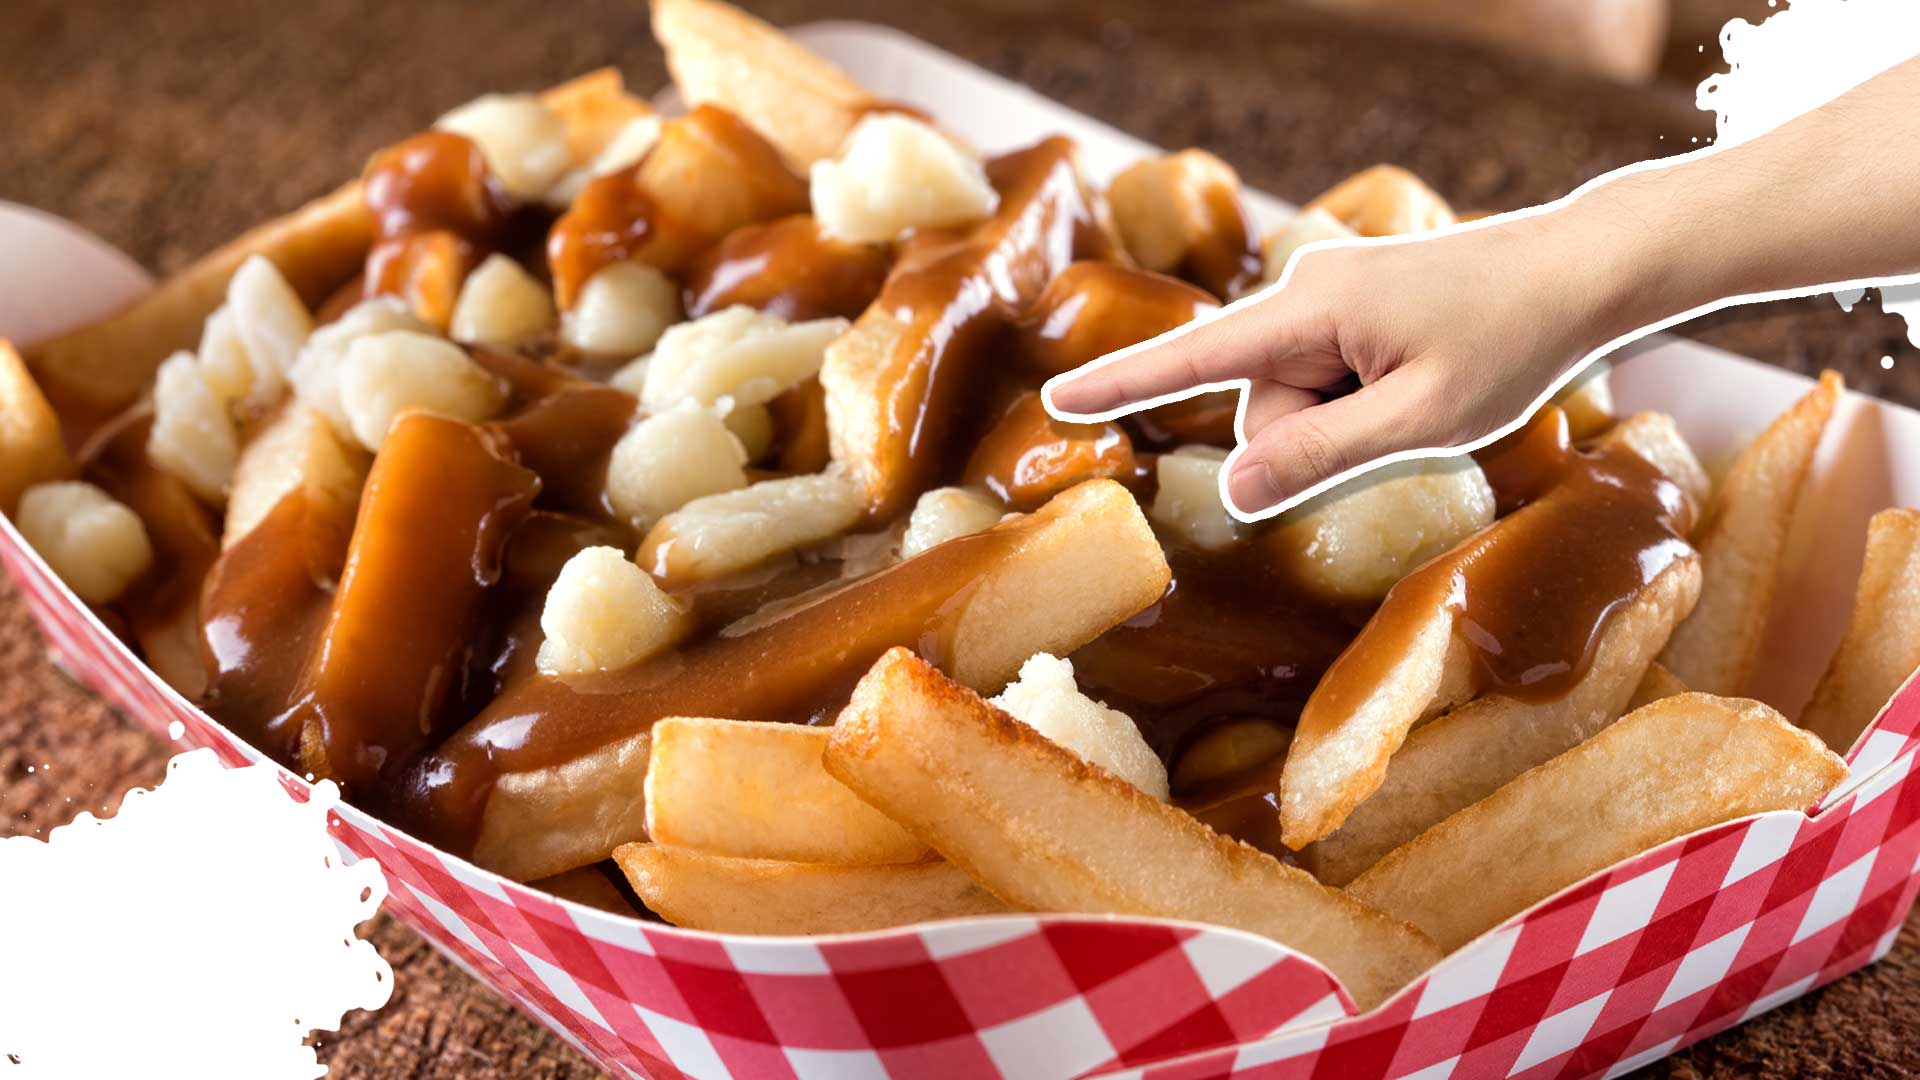 A serving of Canadian chips, gravy and cheese